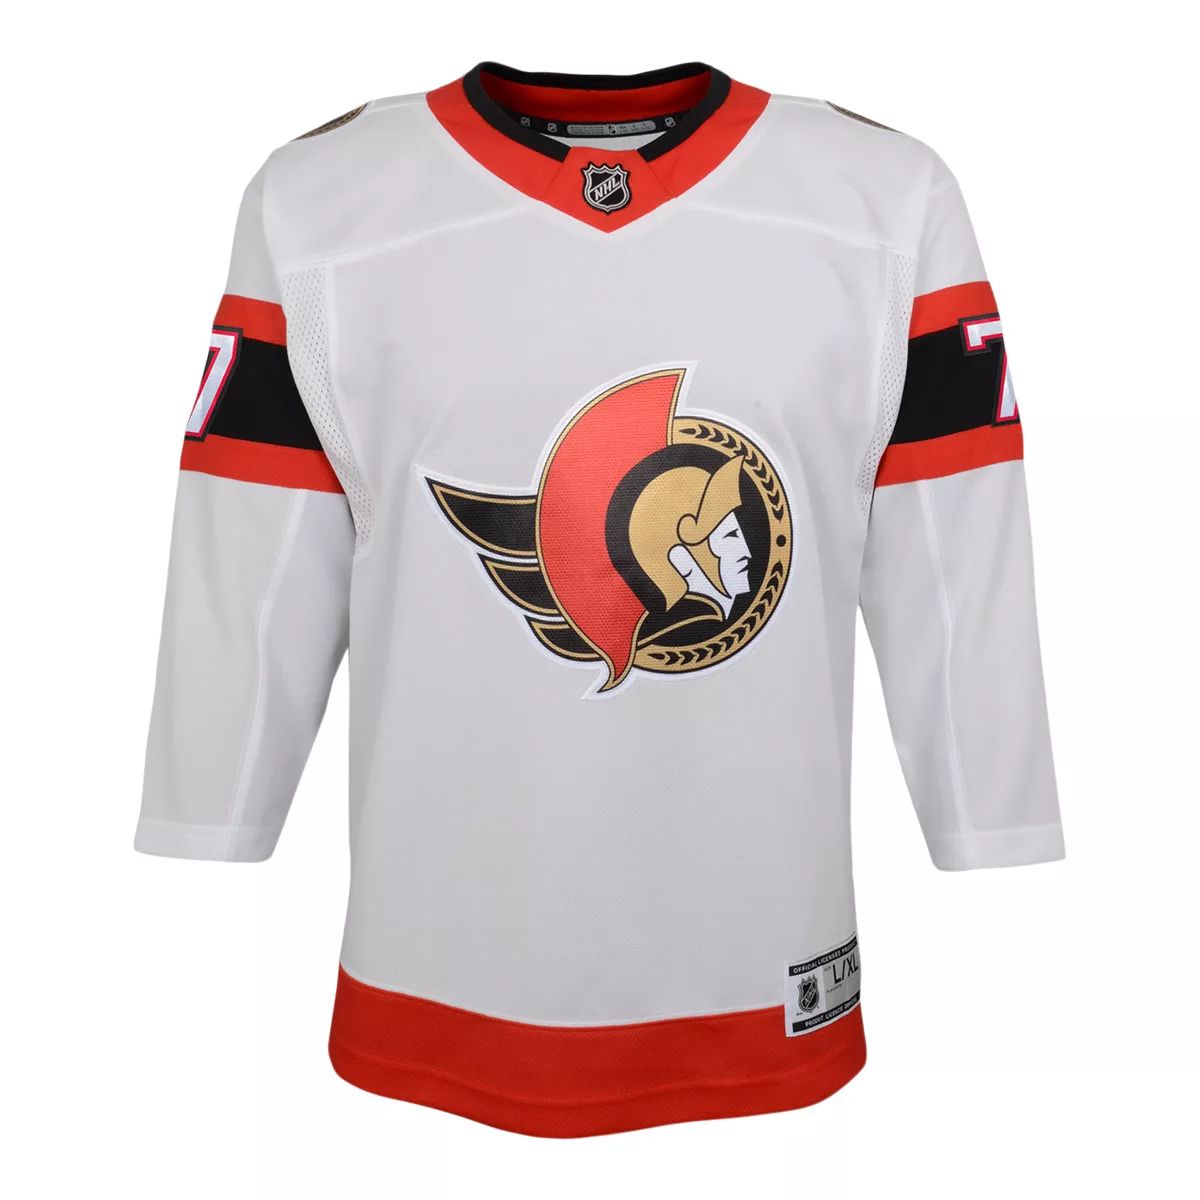 Youth Calgary Flames Outerstuff CC Premier Jersey